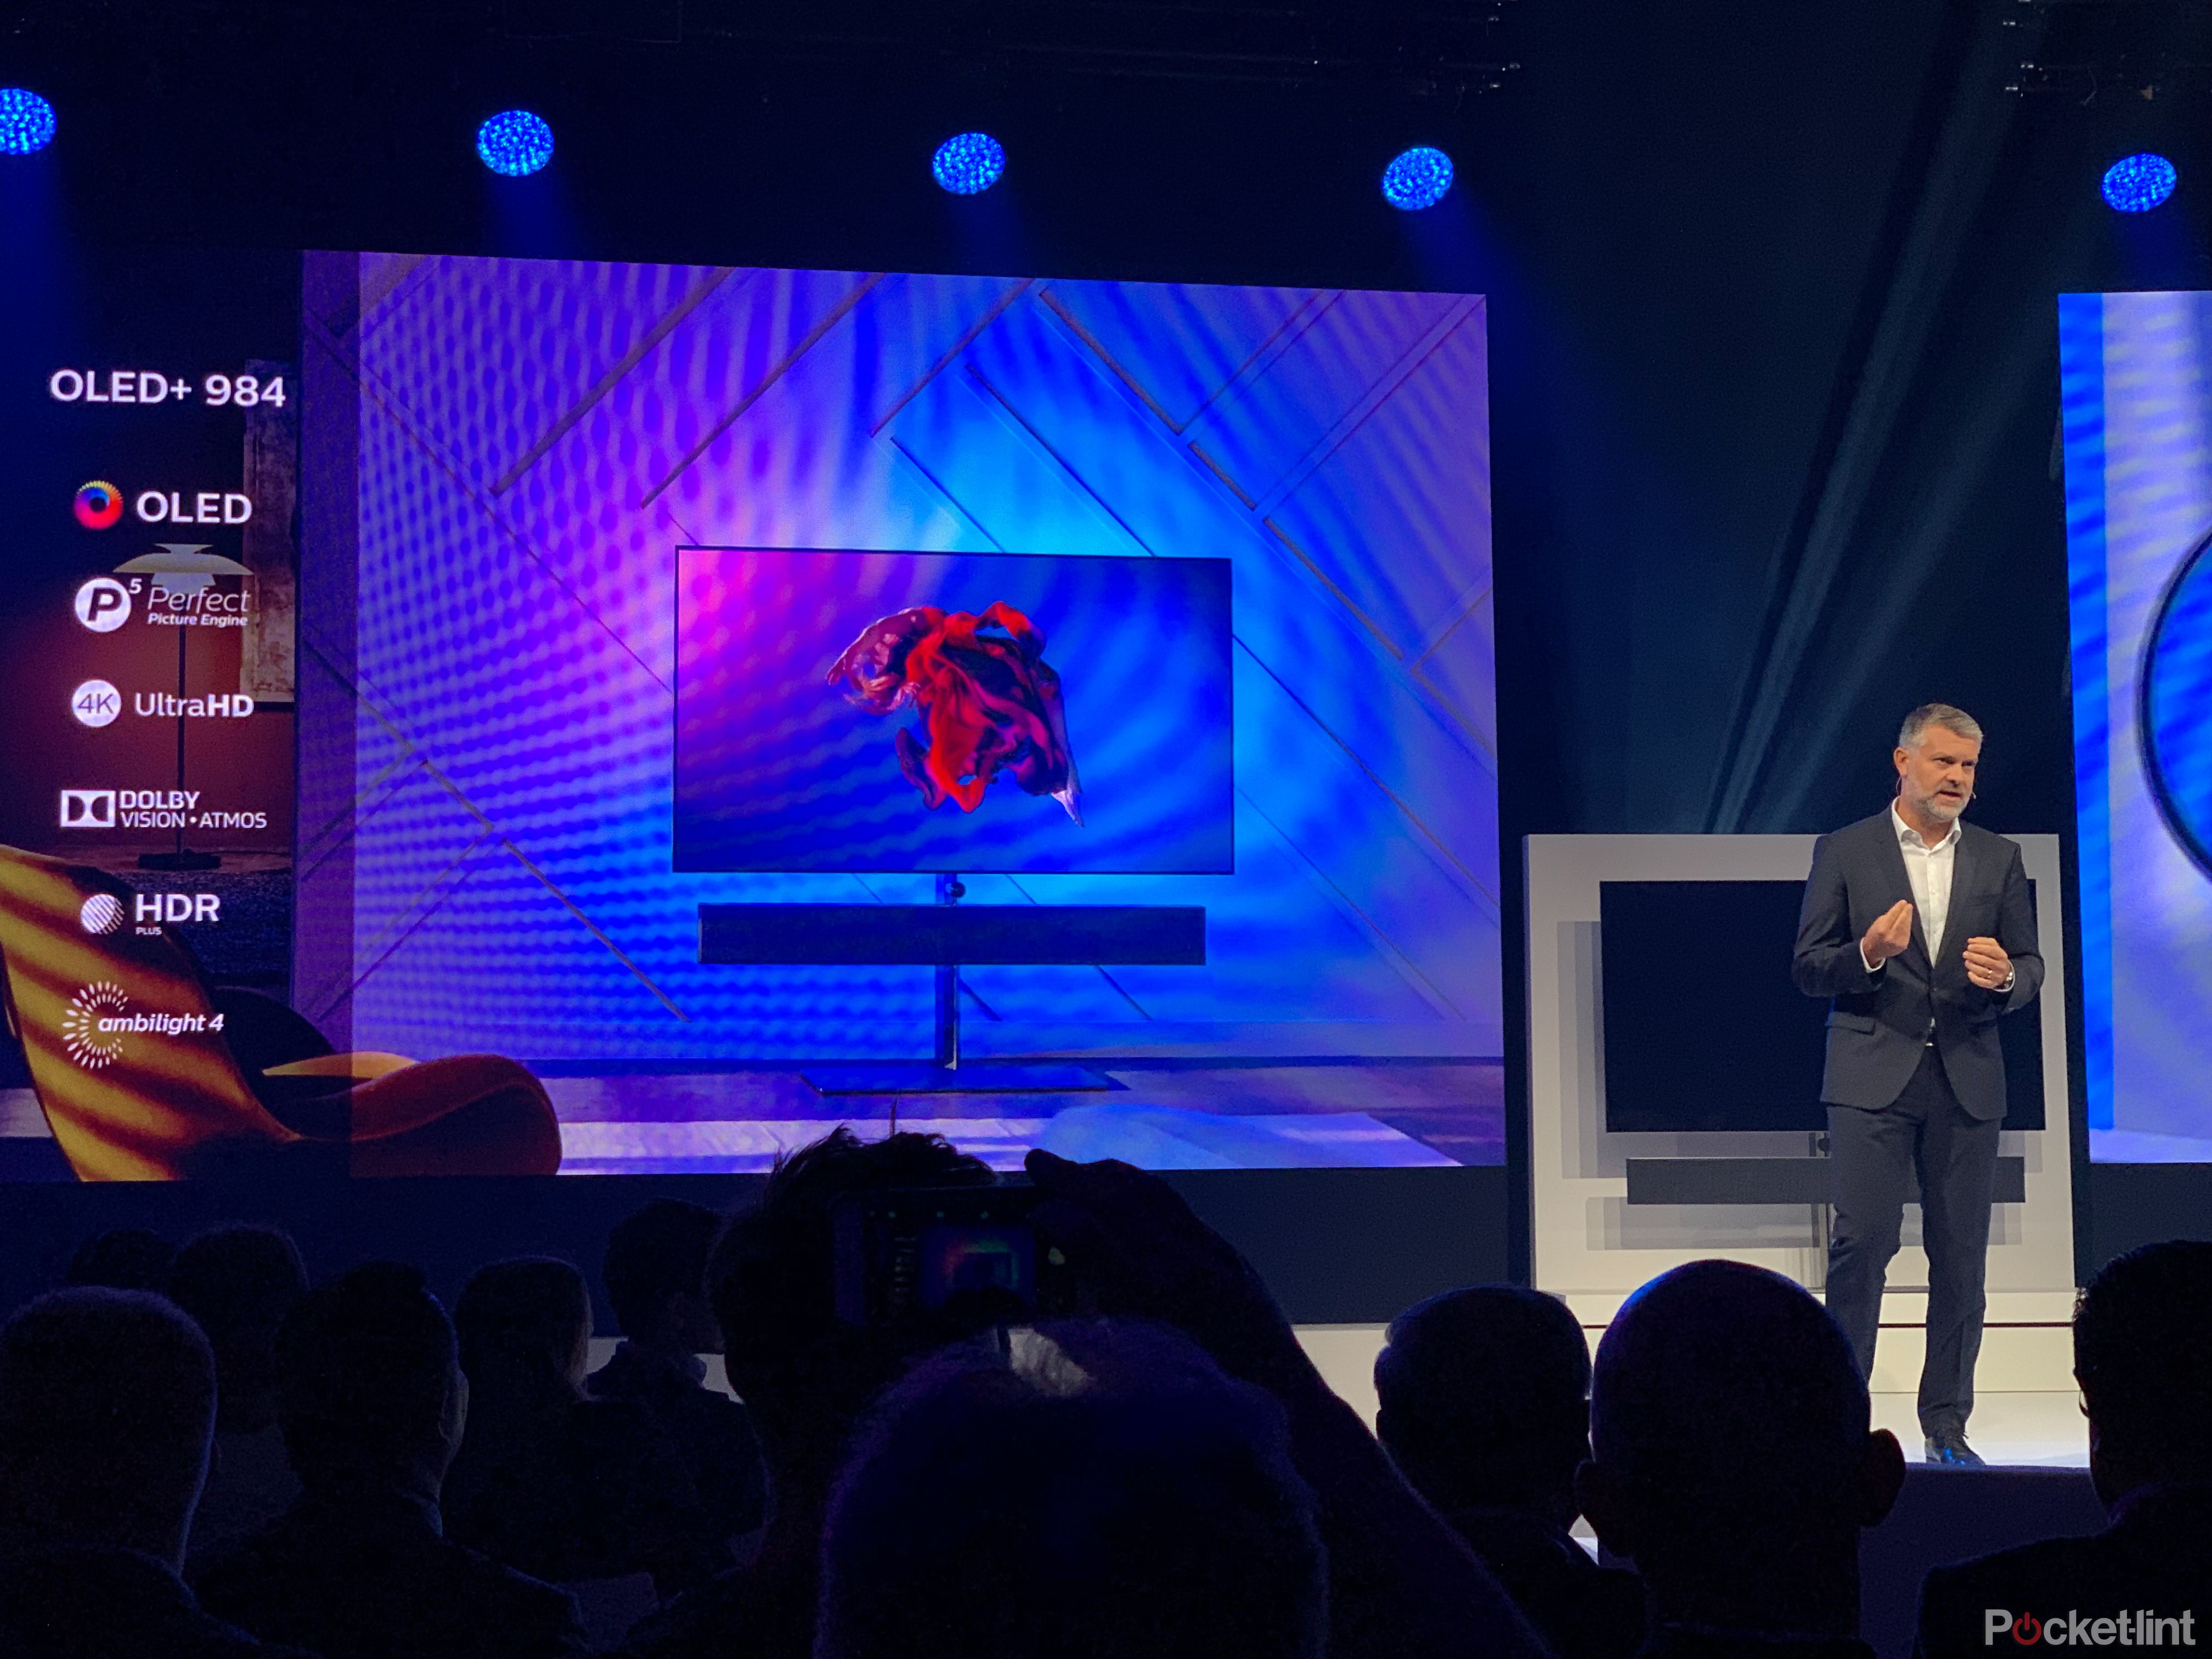 Philips Reveals Tow New Oled Tvs With Third-generation P5 Picture Processor image 3